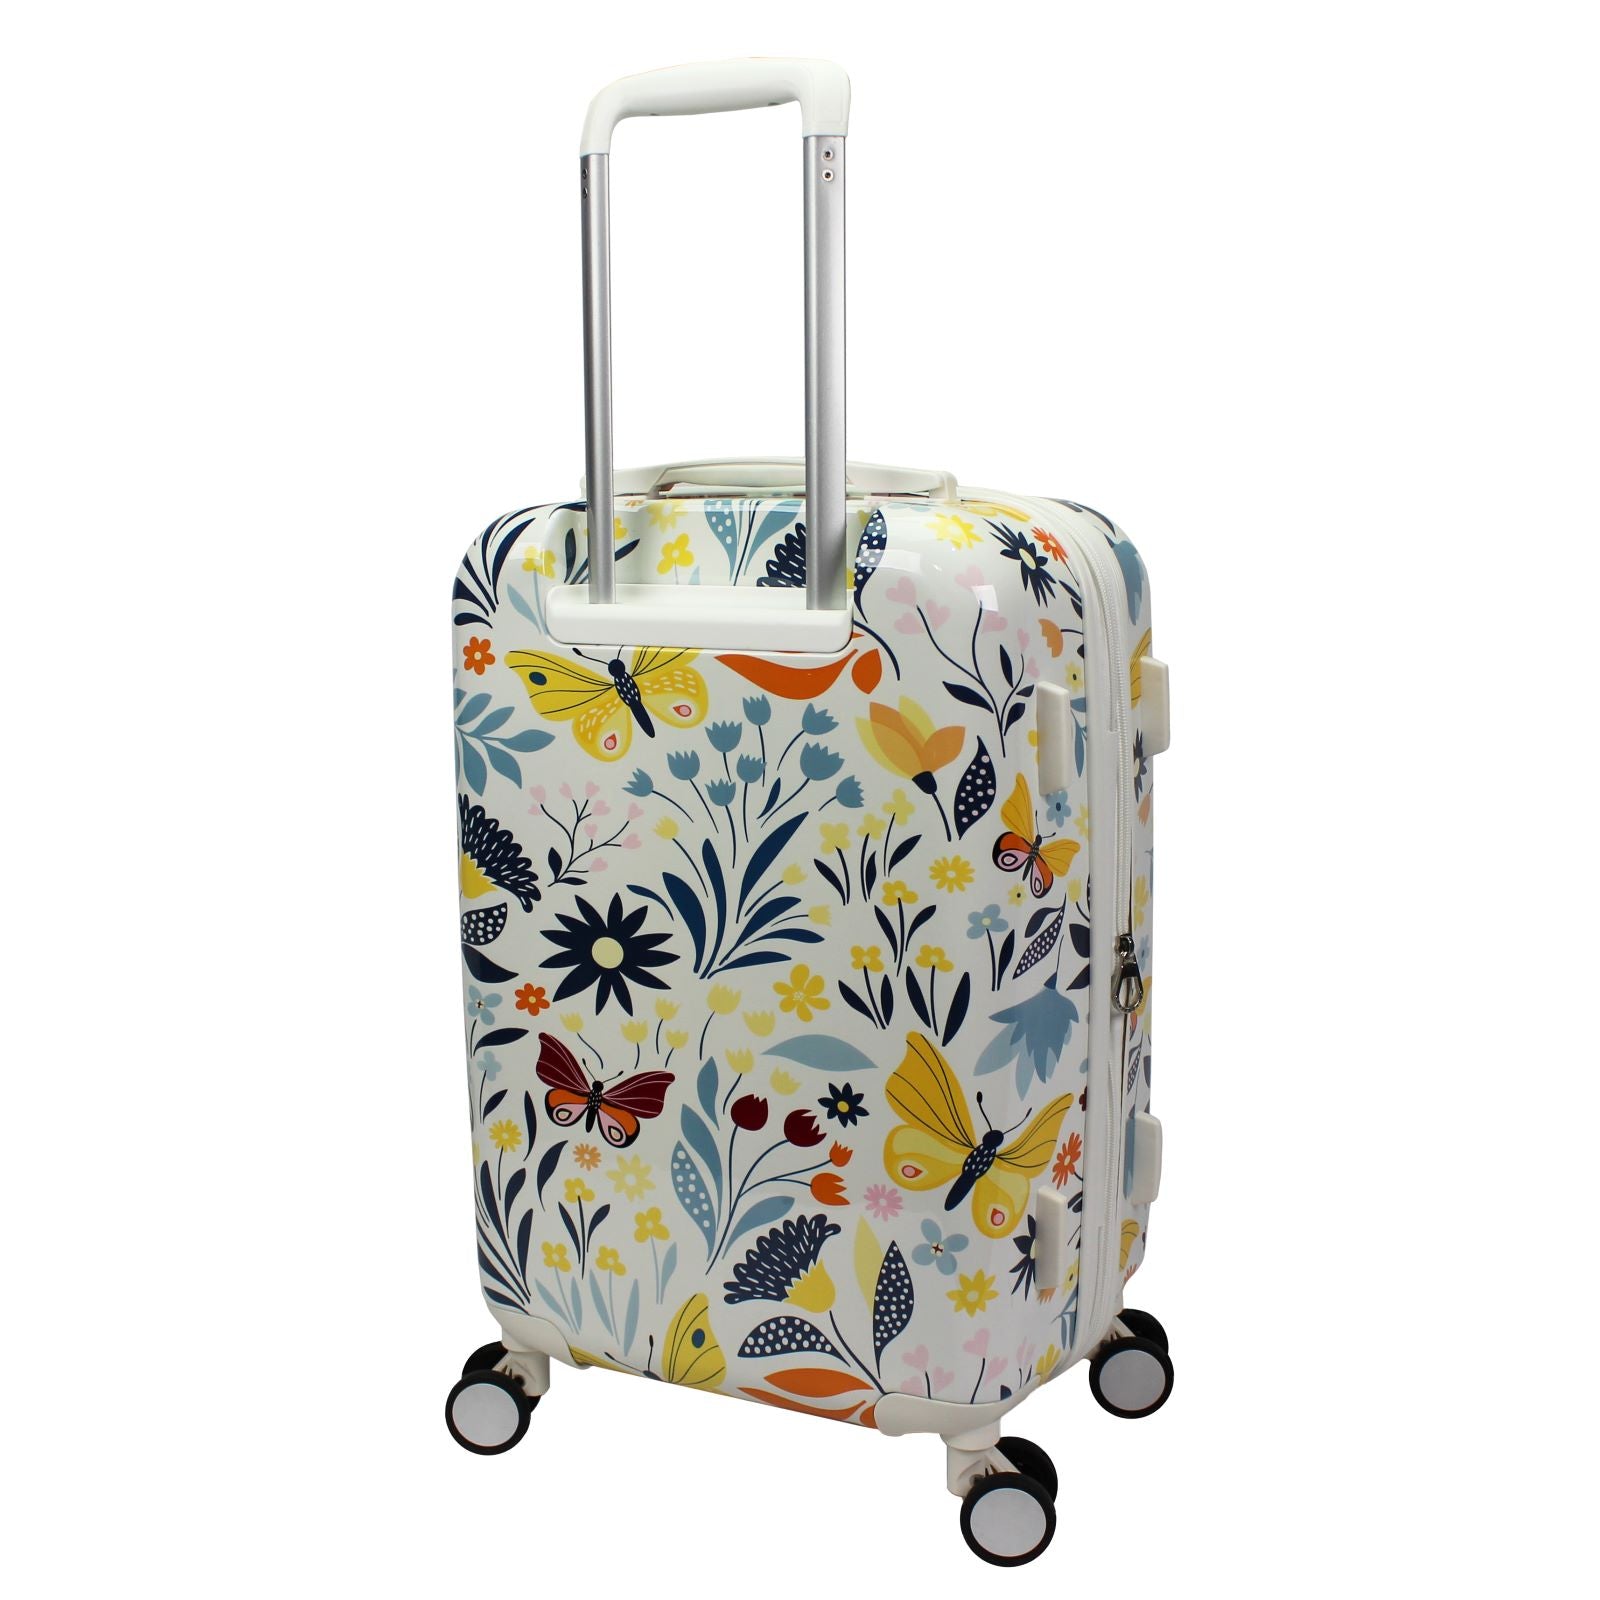 World Traveler Dejuno Floral Butterfly 3-Piece Expandable Spinner Luggage Set